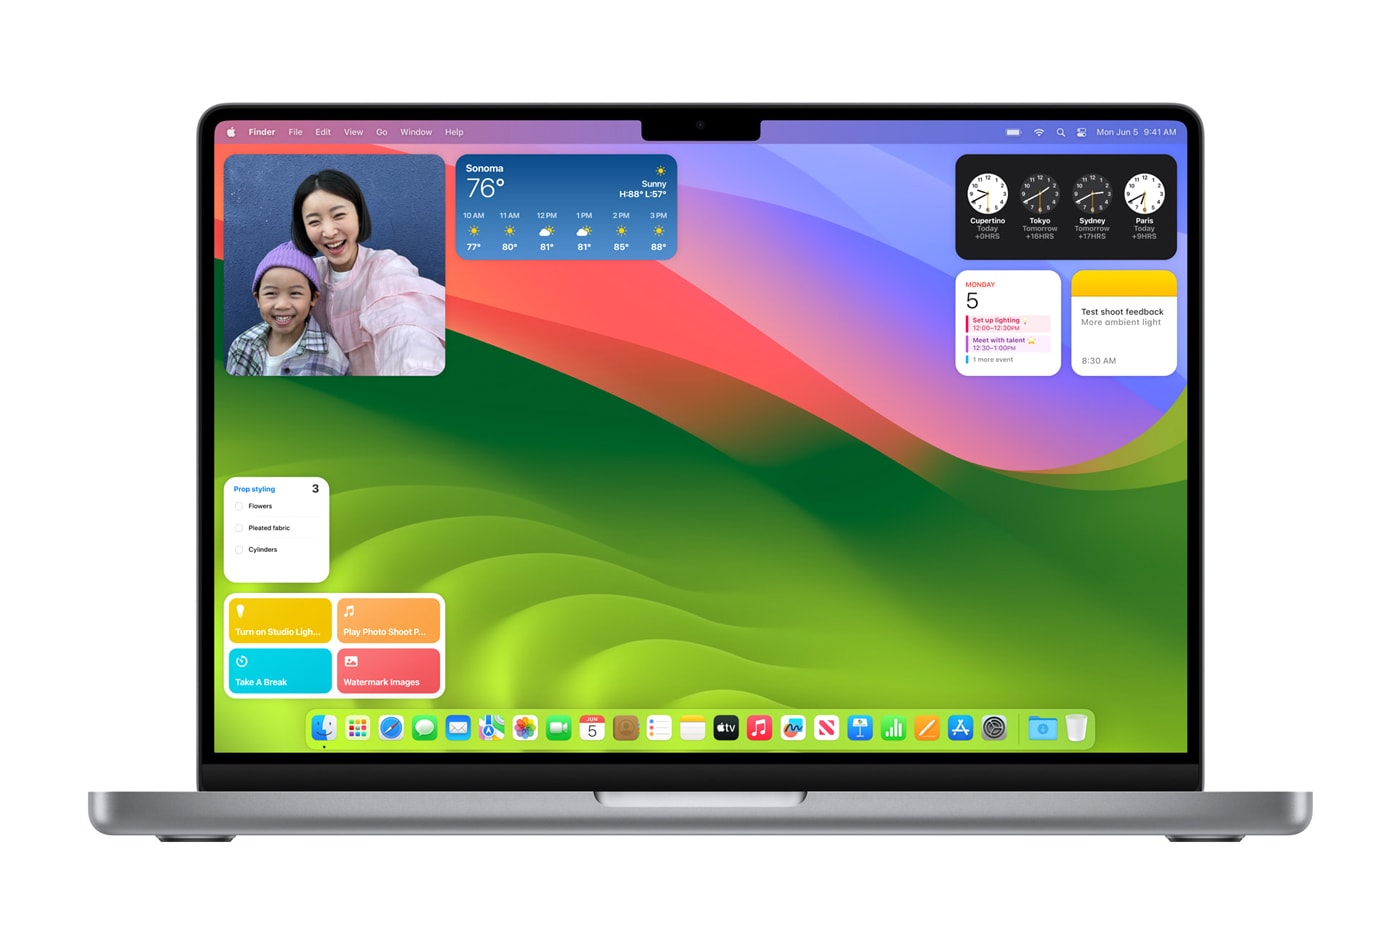 First Look at the New Apple macOS Sonoma Features interactive widgets video conferencing screen savers hybrid remote workflows game mode info news